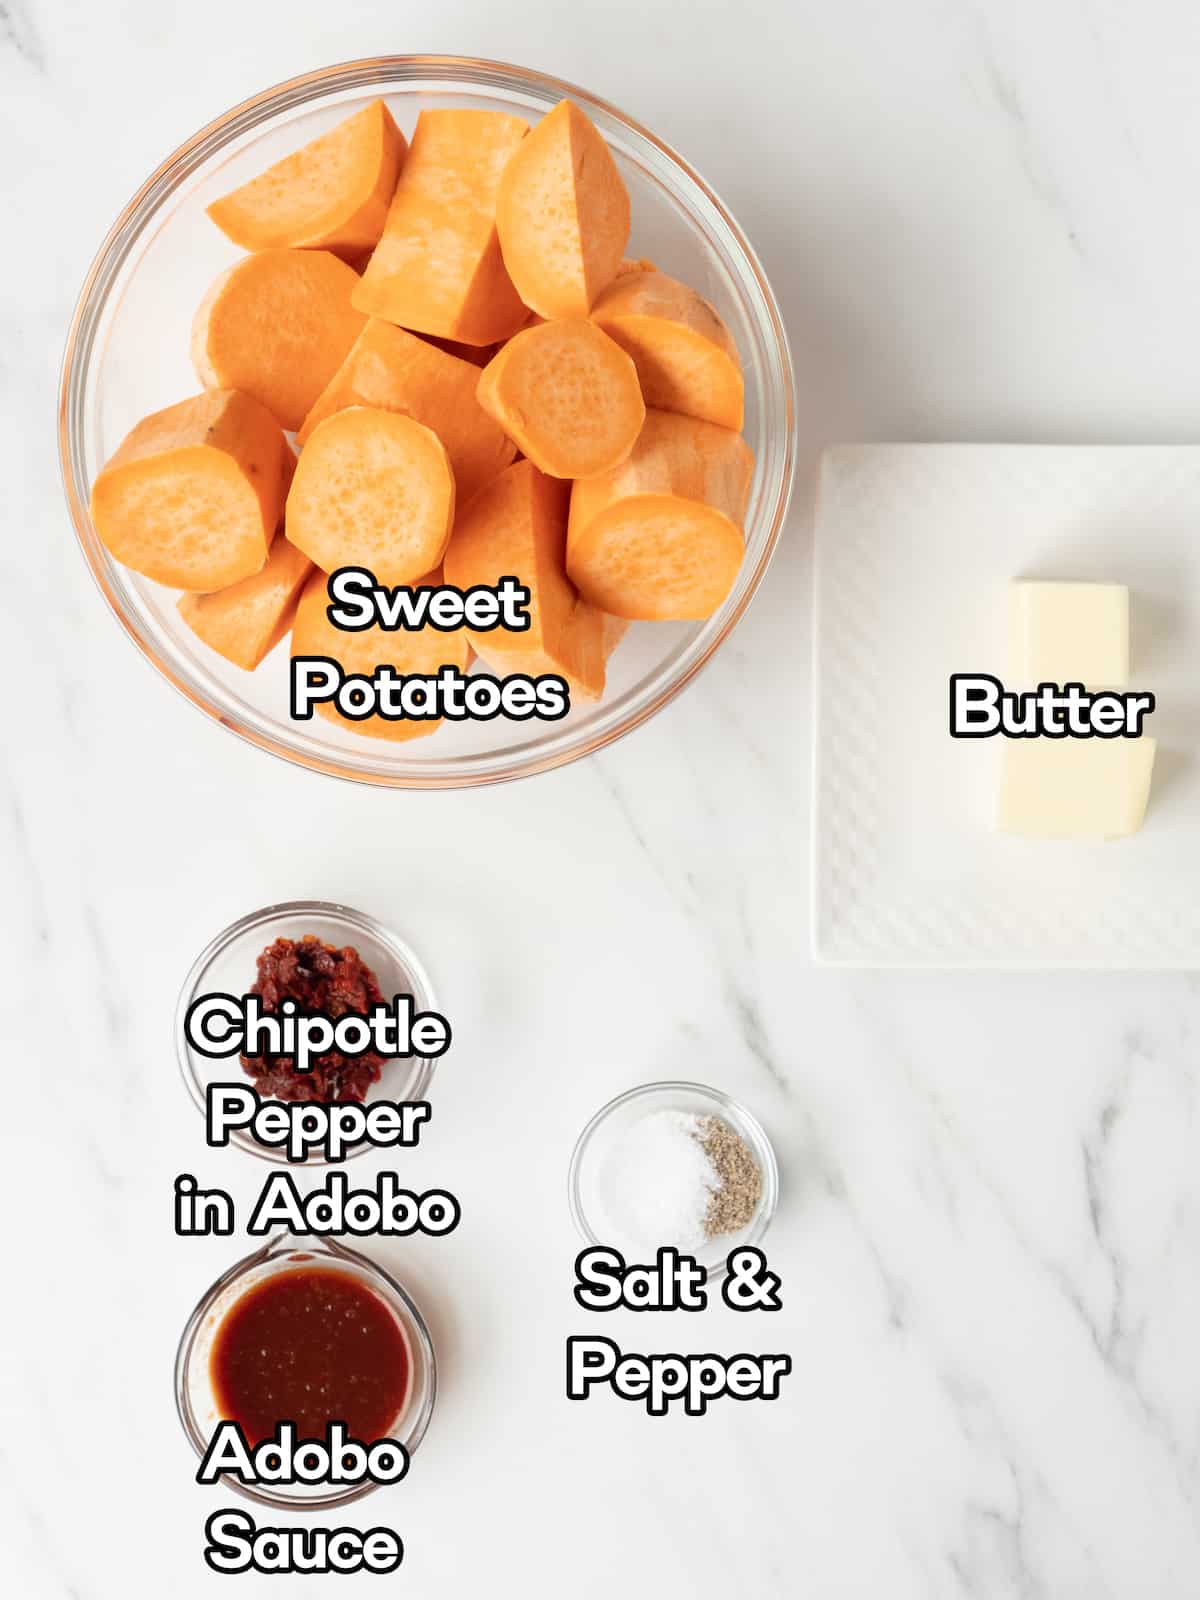 mise-en-place with all the ingredients required to make chipotle mashed sweet potatoes.